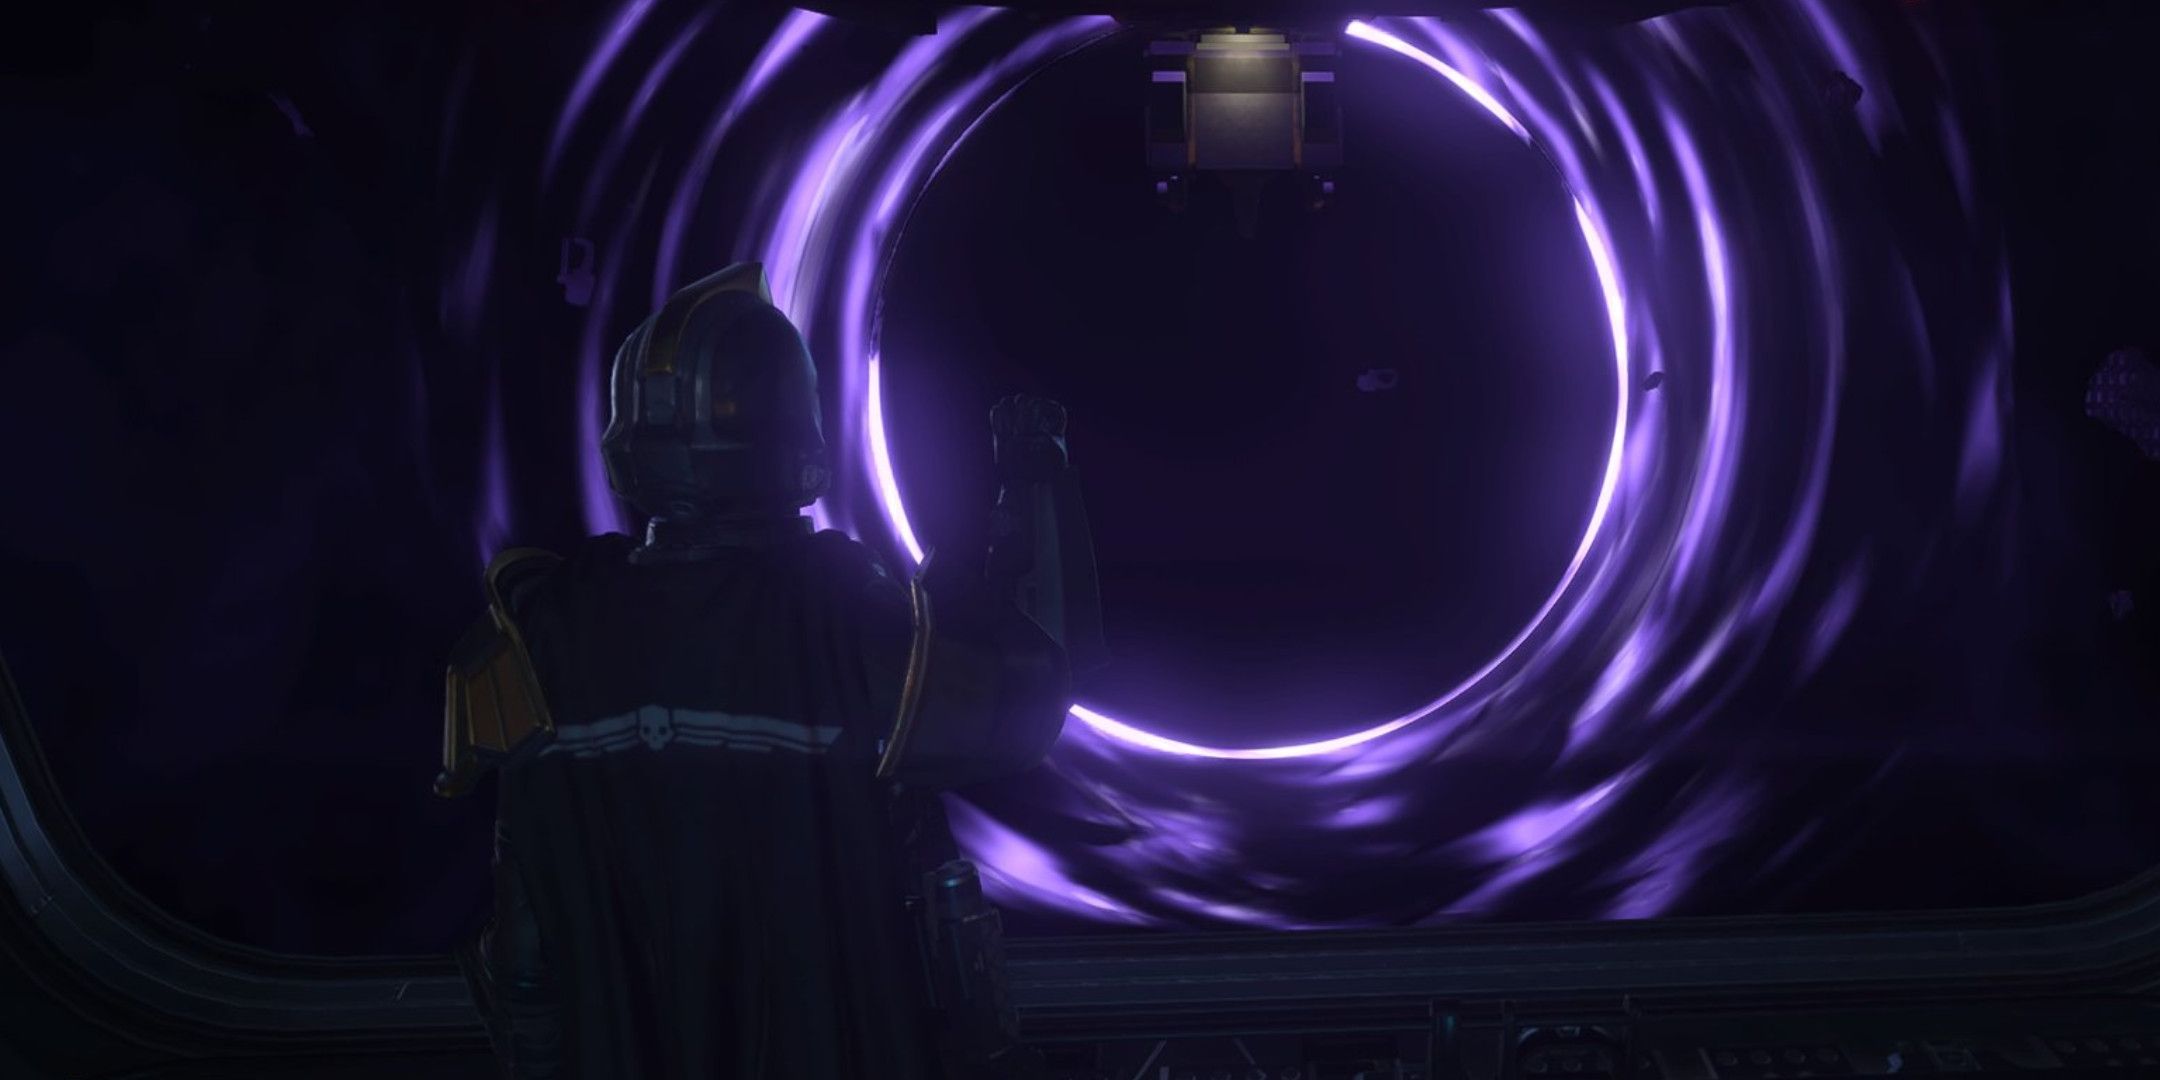 A man in armor and a cape saluting in front of a massive purple black hole